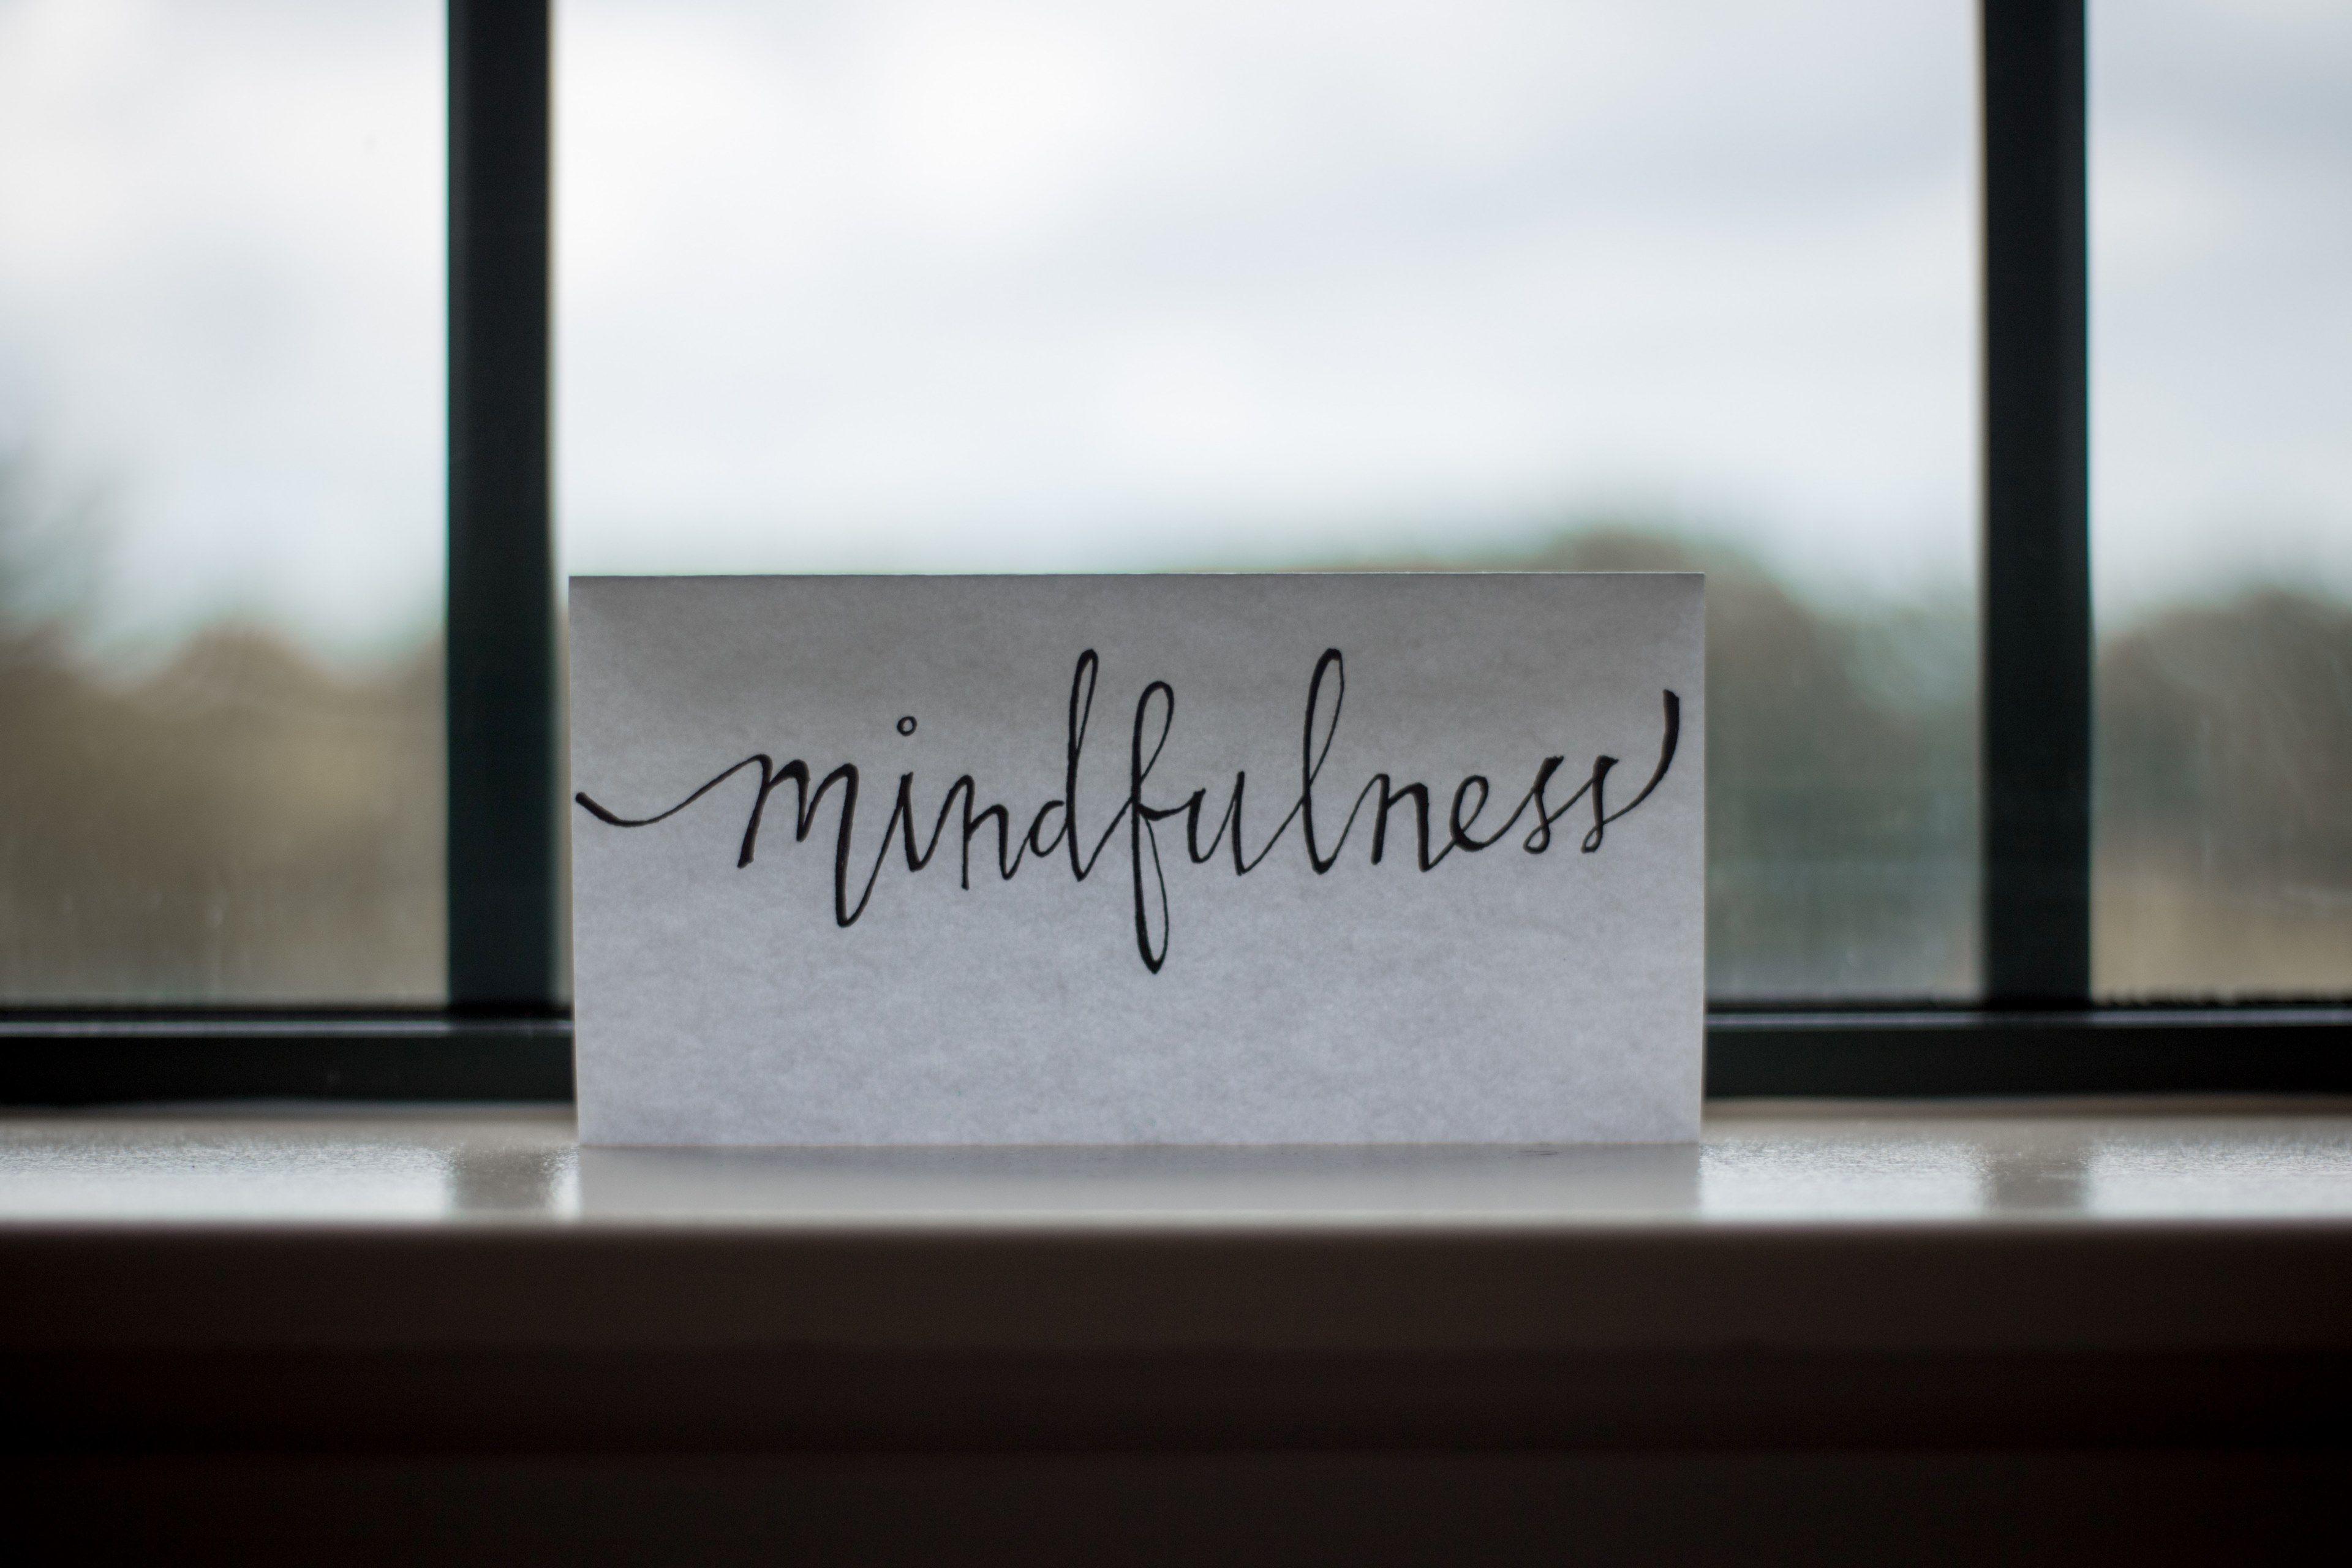 Free, #mindfulness wallpaper and background